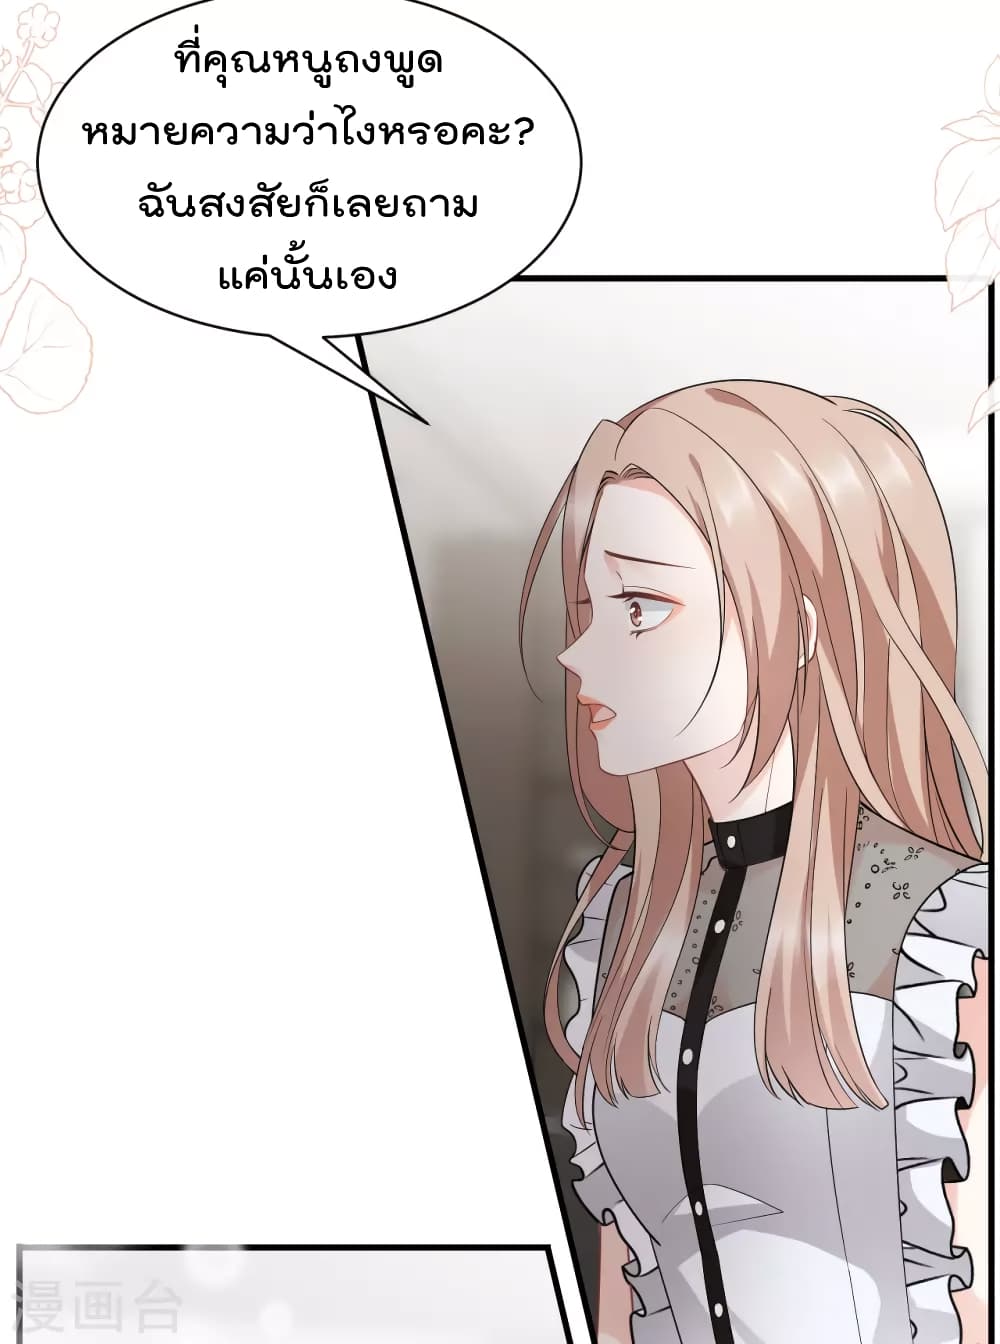 What Can the Eldest Lady Have คุณหนูใหญ่ ทำไมคุณร้ายอย่างนี้ 33-33